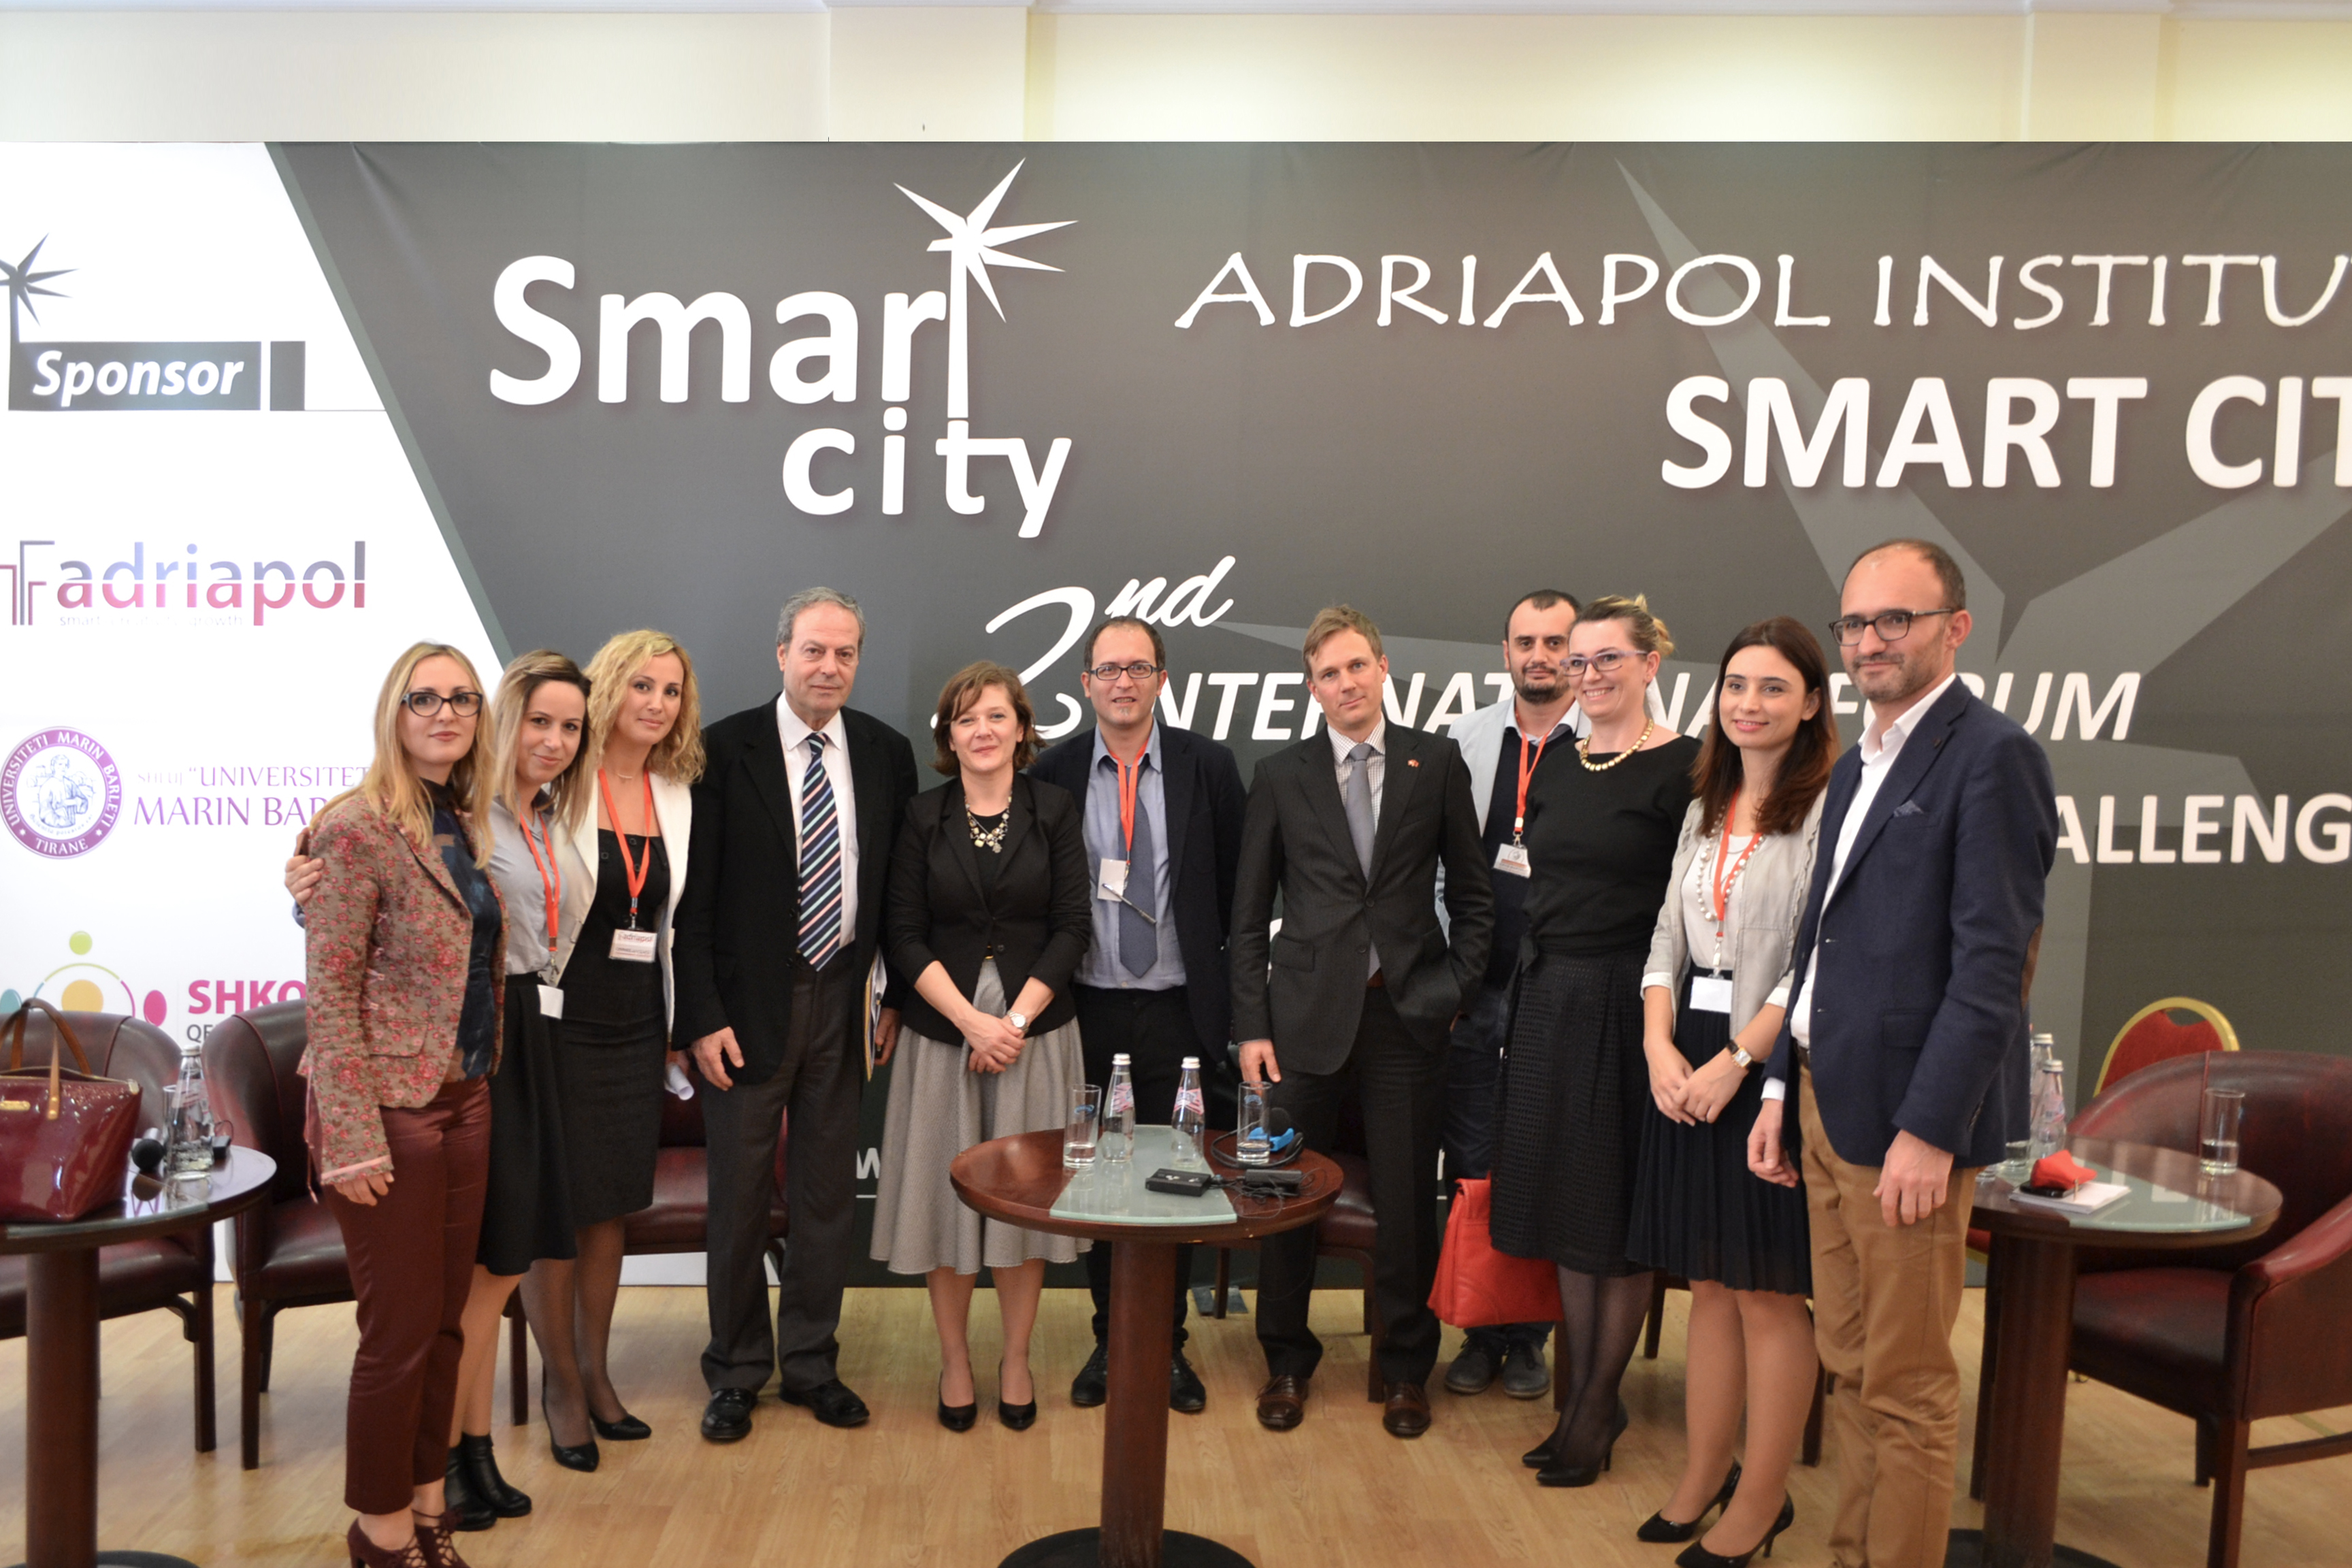 First Forum on Smart City